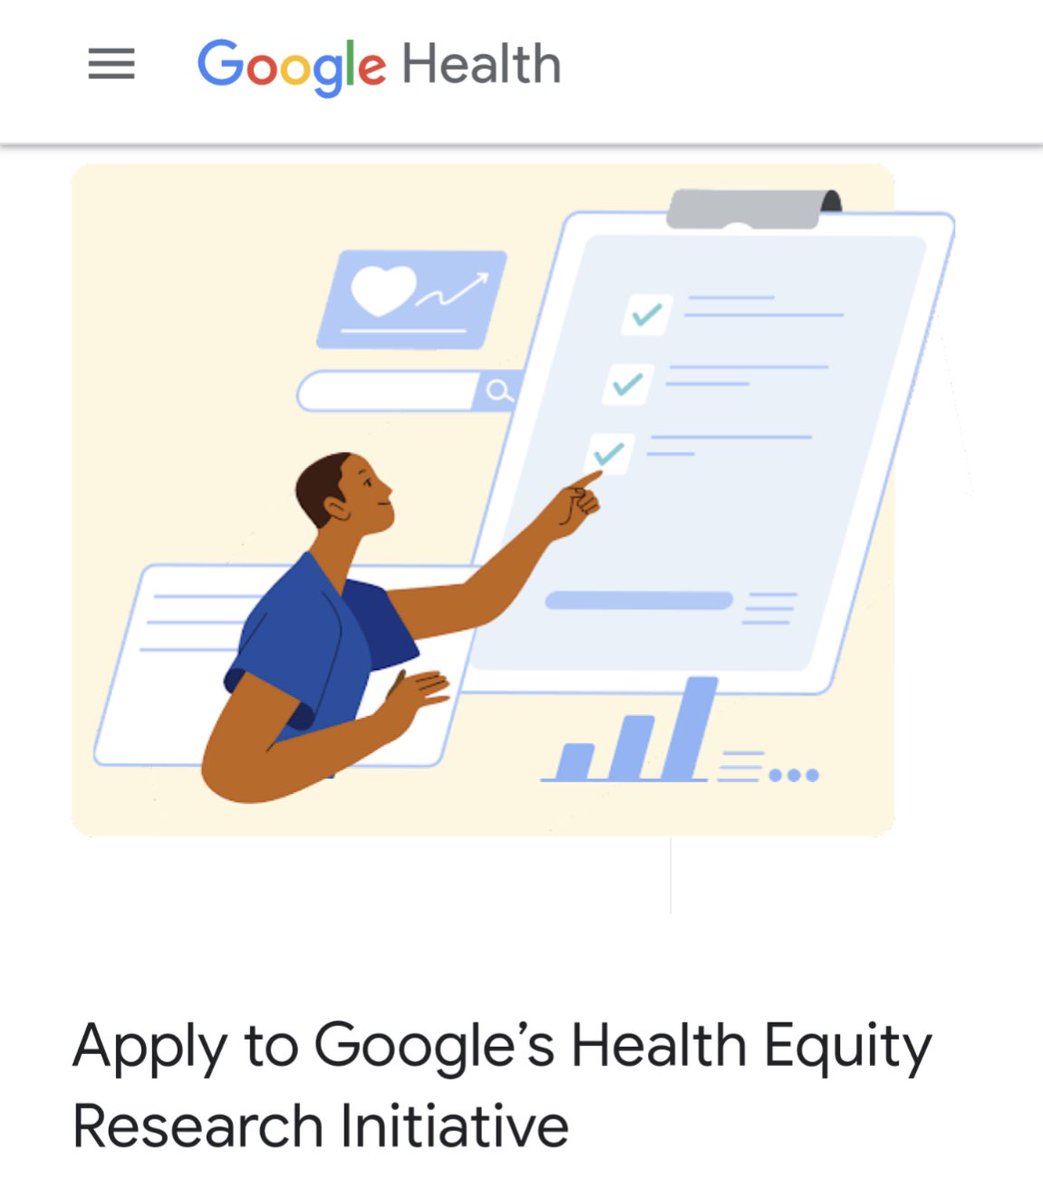 Health Equity researchers - apply here for Google’s Health Equity Research Initiative! health.google/health-equity/ @DrIvorHorn @GoogleHealth